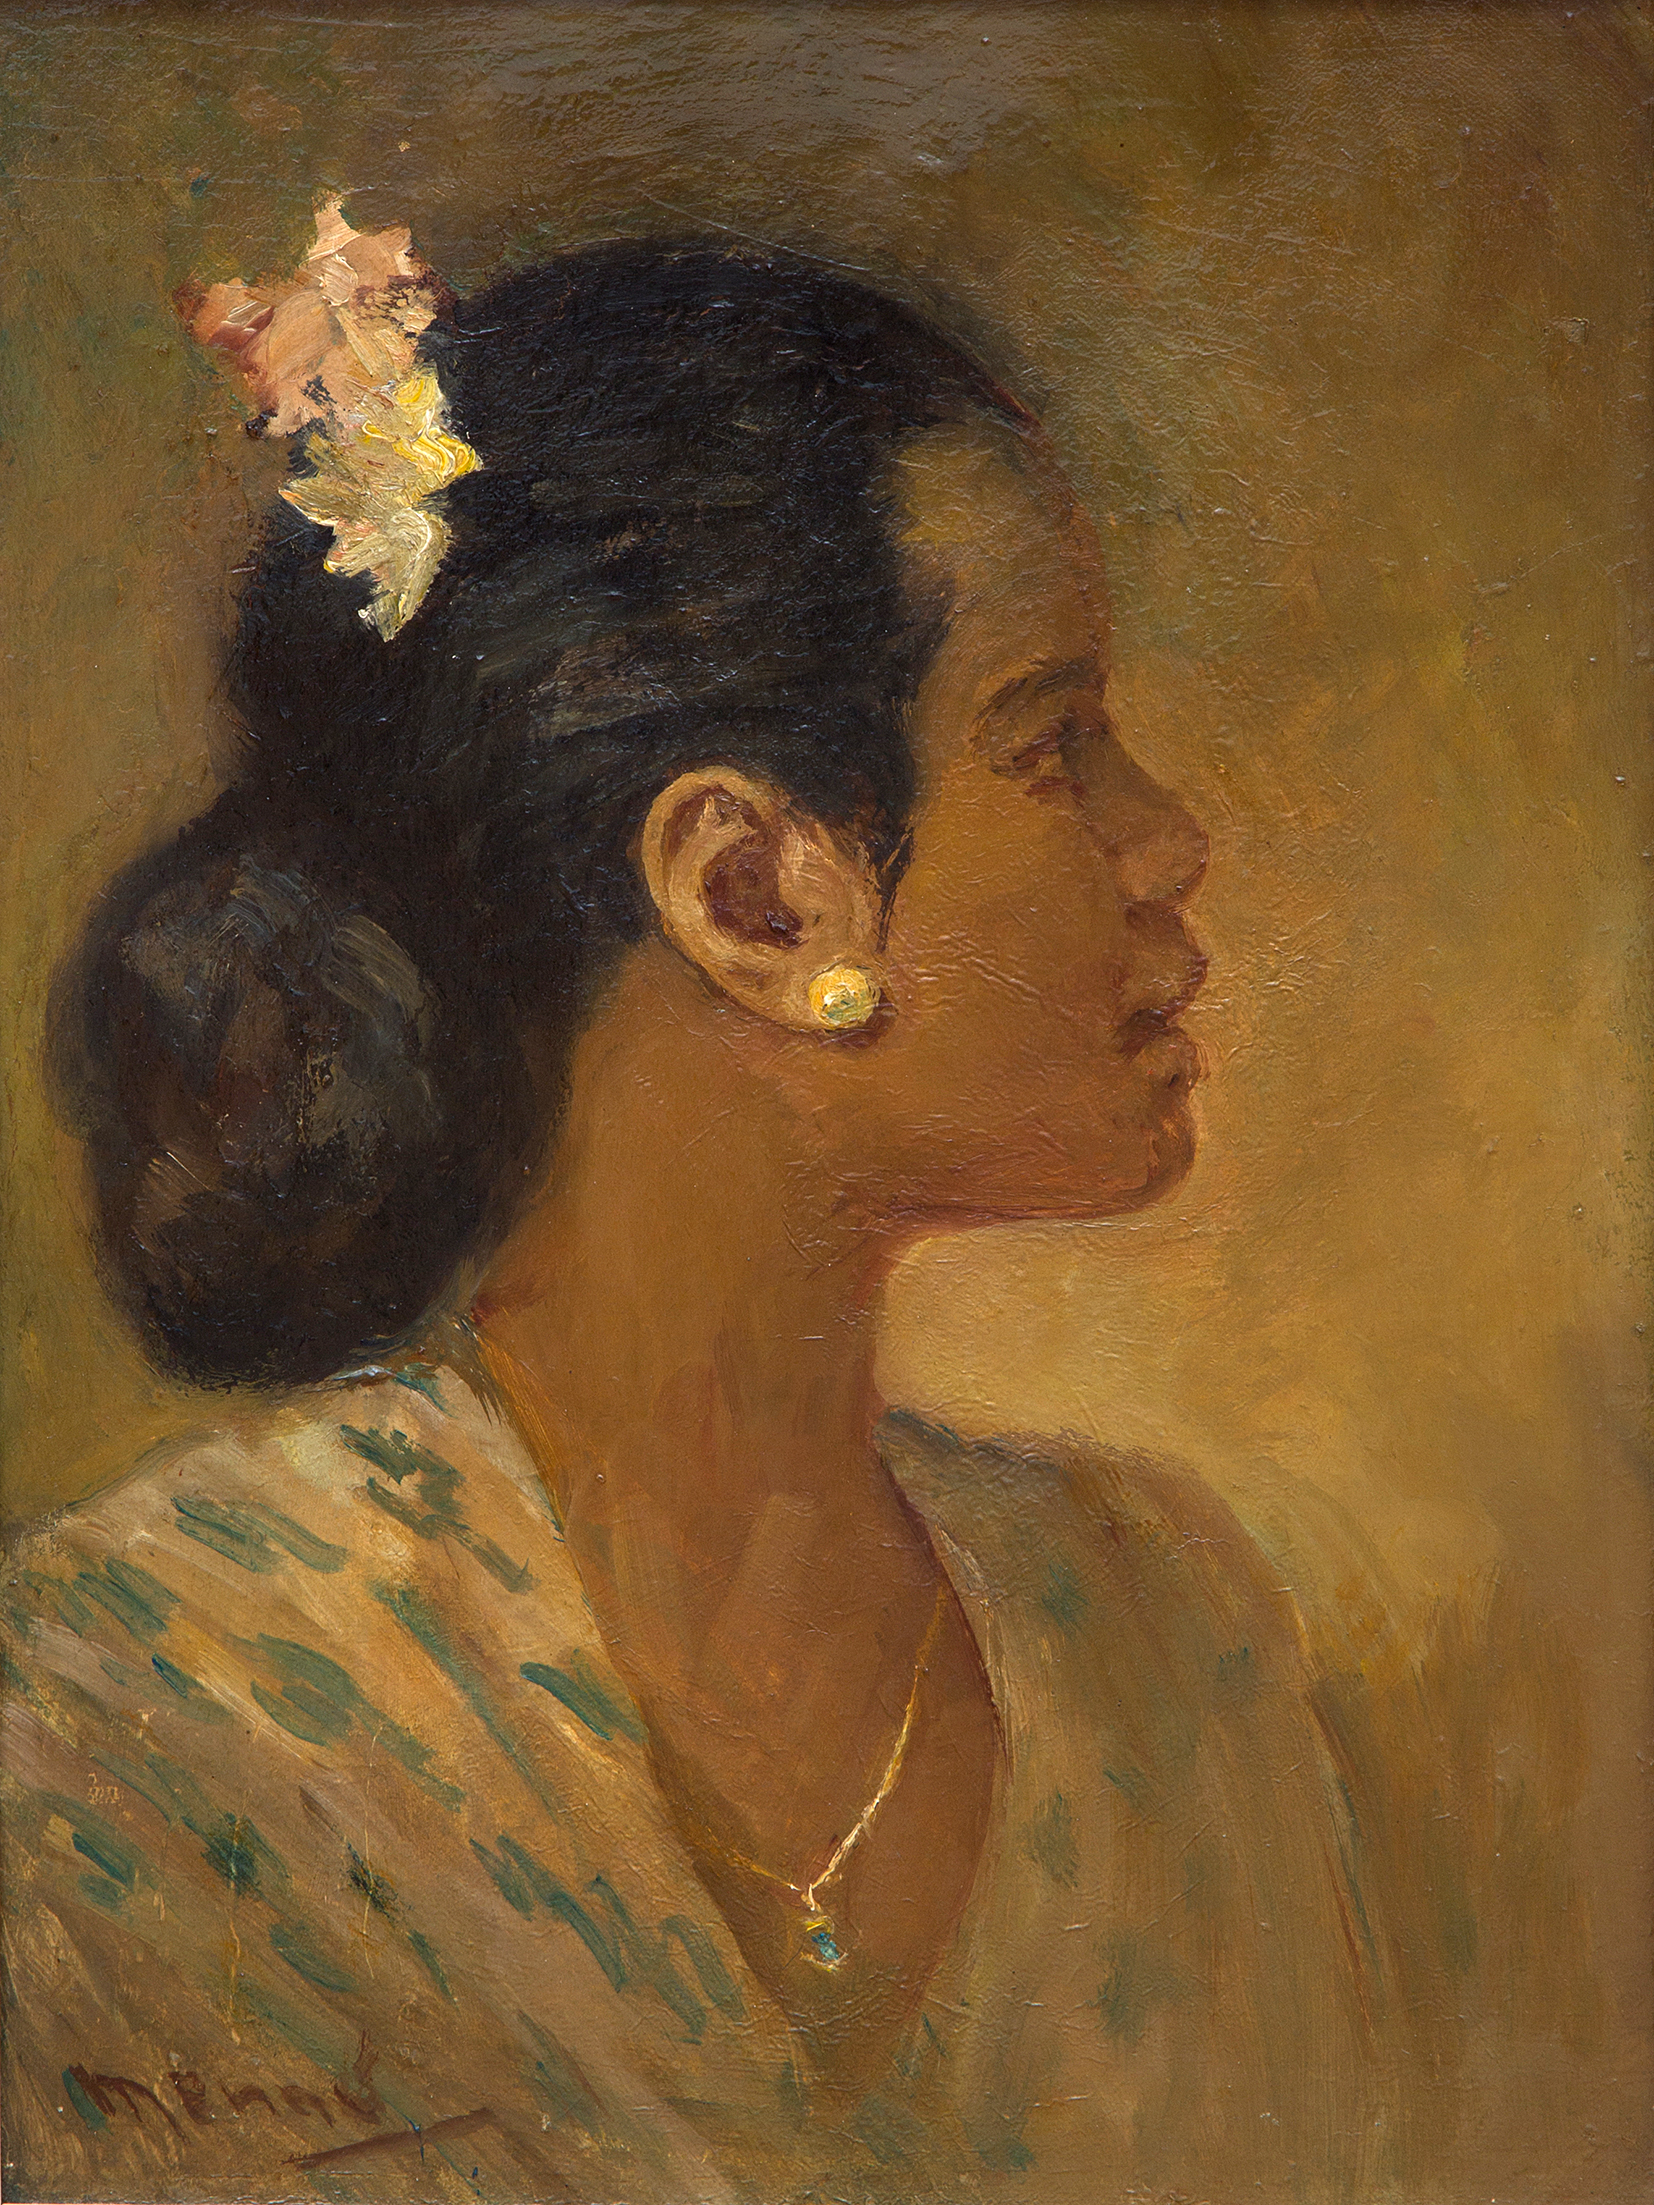 Portrait of a Javanese woman with flower in hair